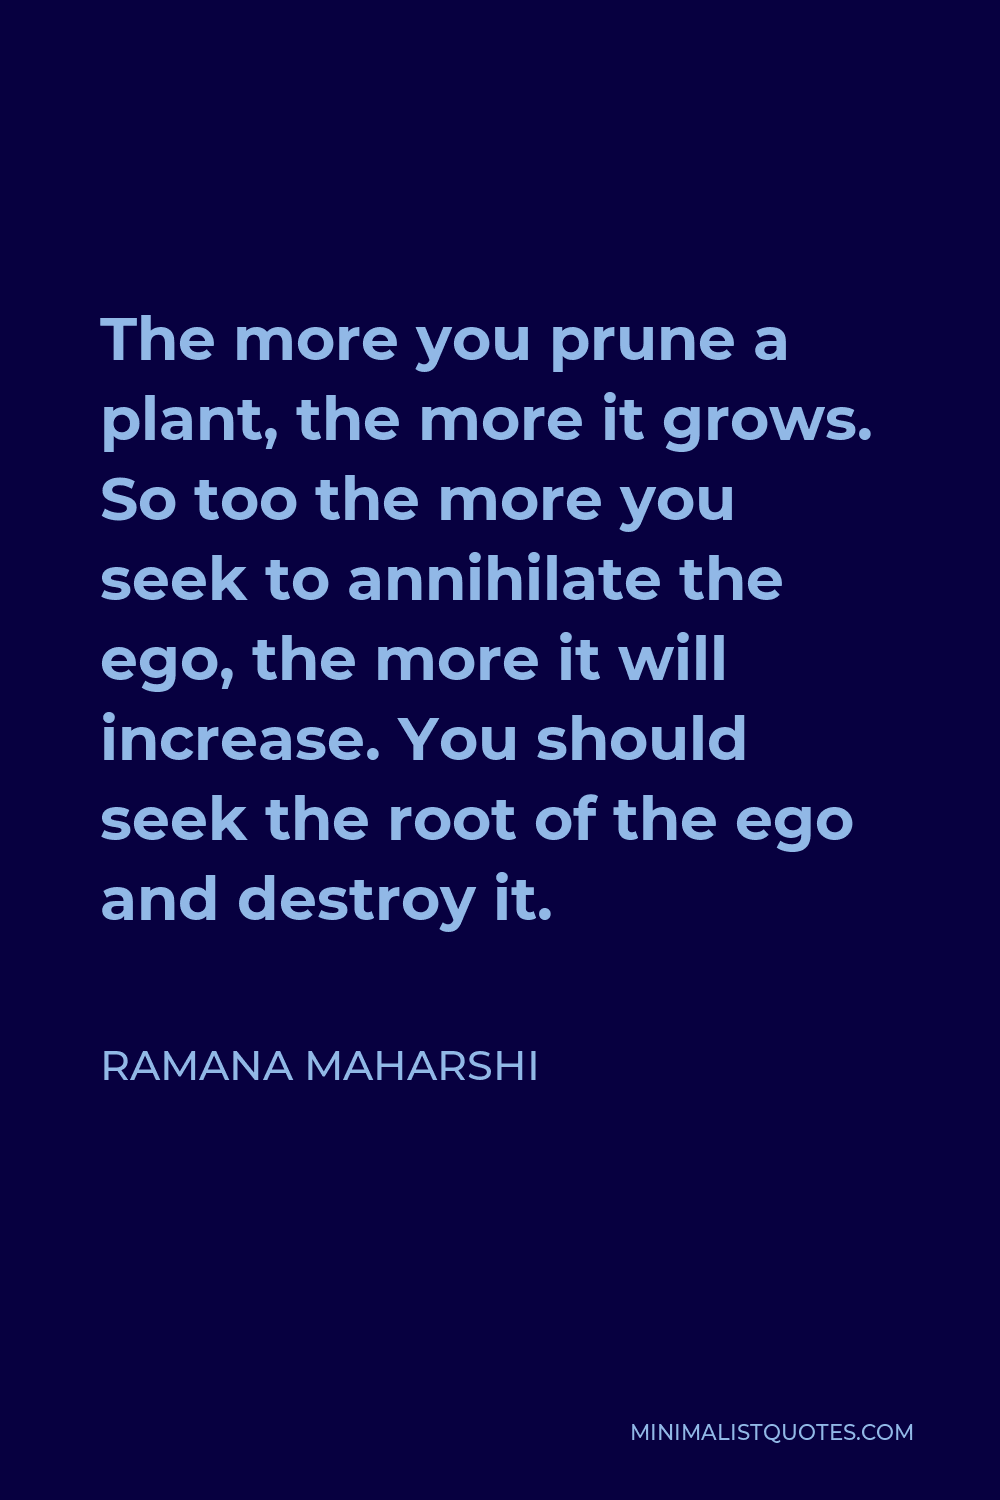 Ramana Maharshi Quote - The more you prune a plant, the more it grows. So too the more you seek to annihilate the ego, the more it will increase. You should seek the root of the ego and destroy it.